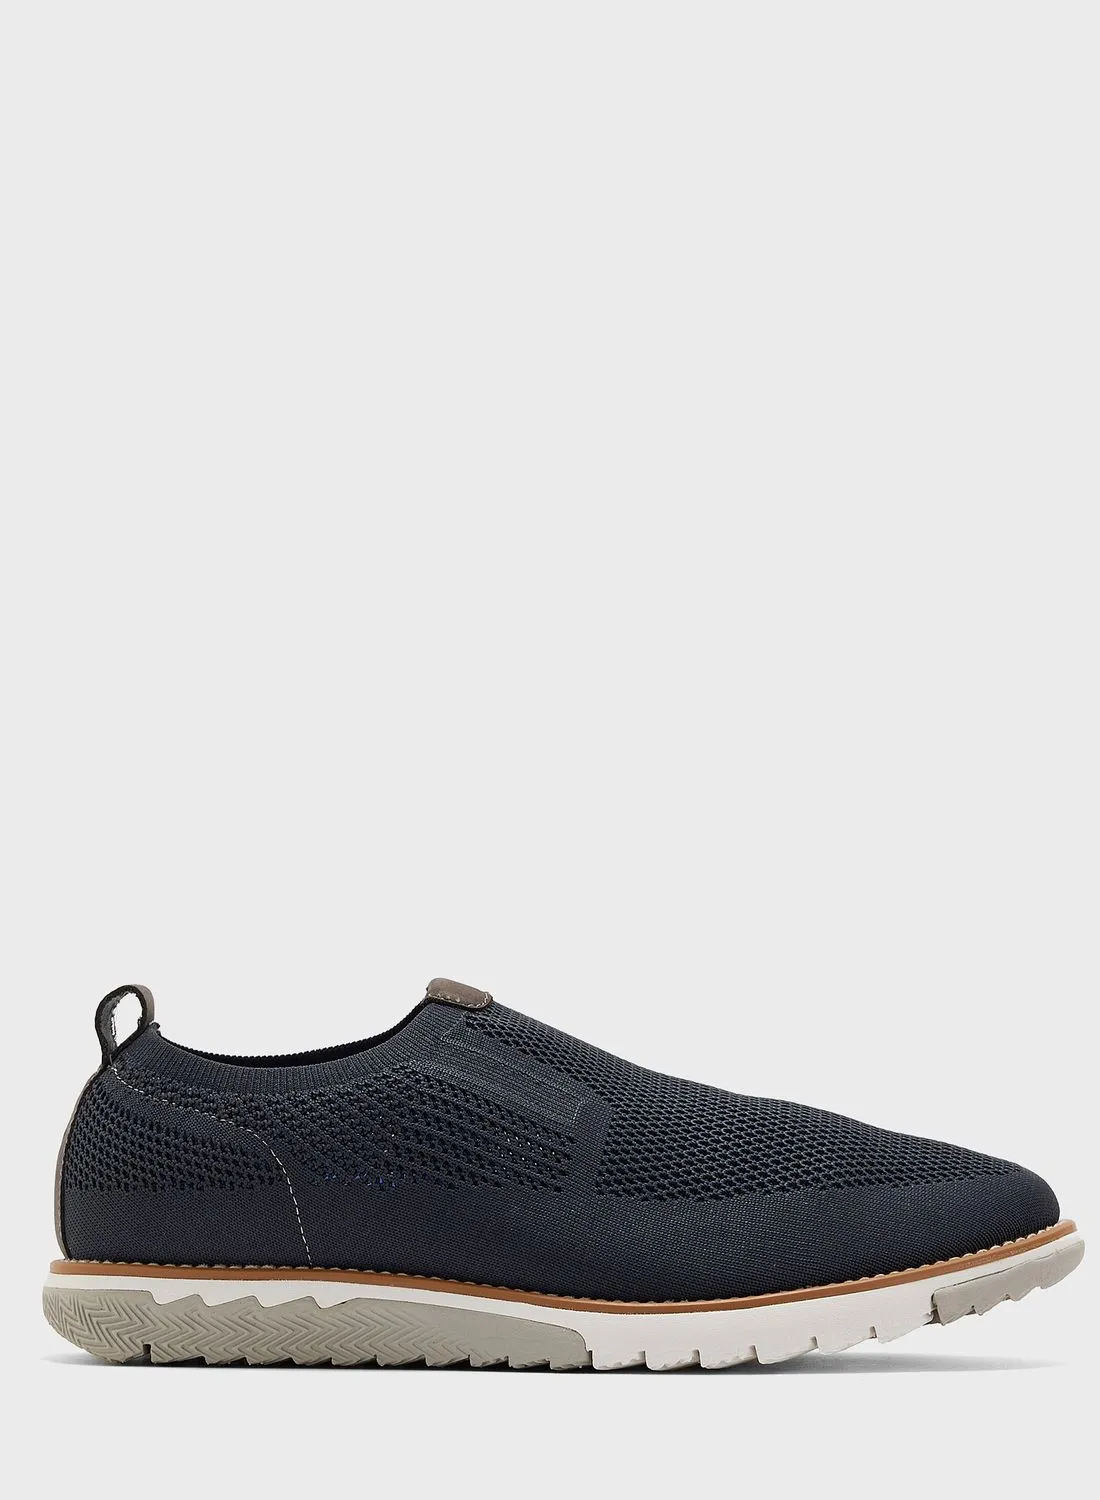 Hush Puppies Casual Oxford Slip Ons Shoes